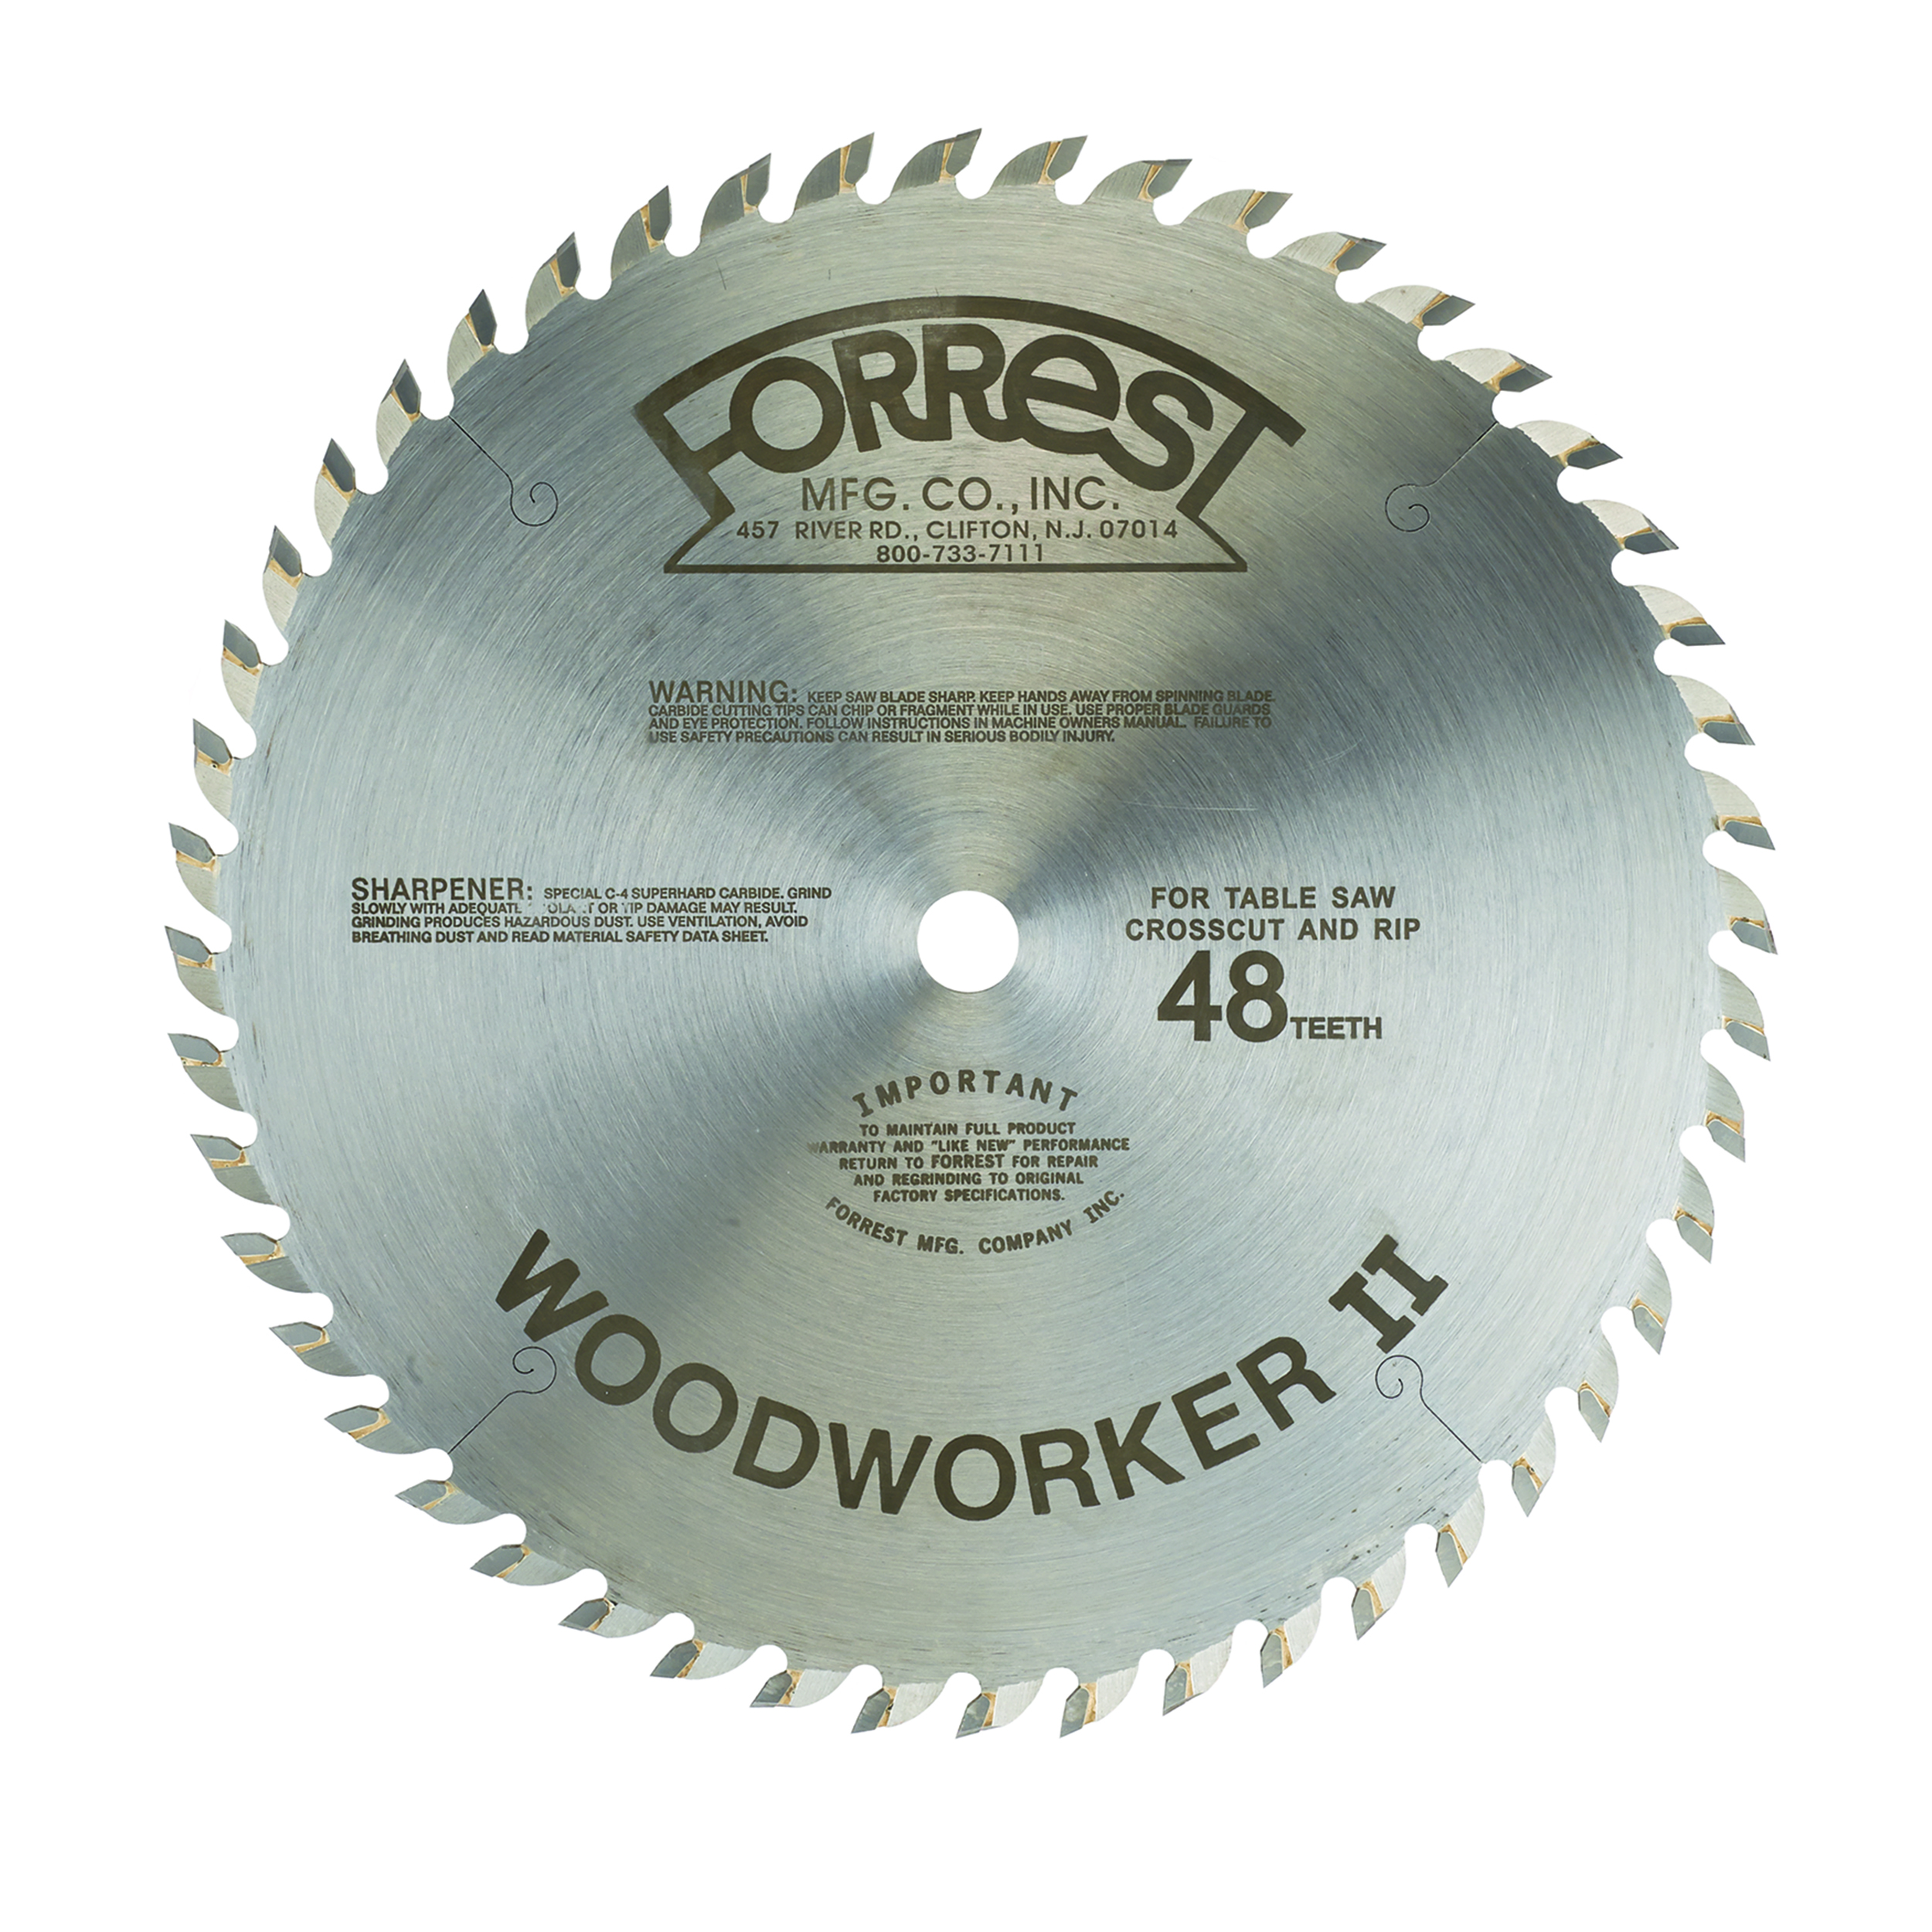 Woodworker Ii Saw Blade 10" X 48 Tooth